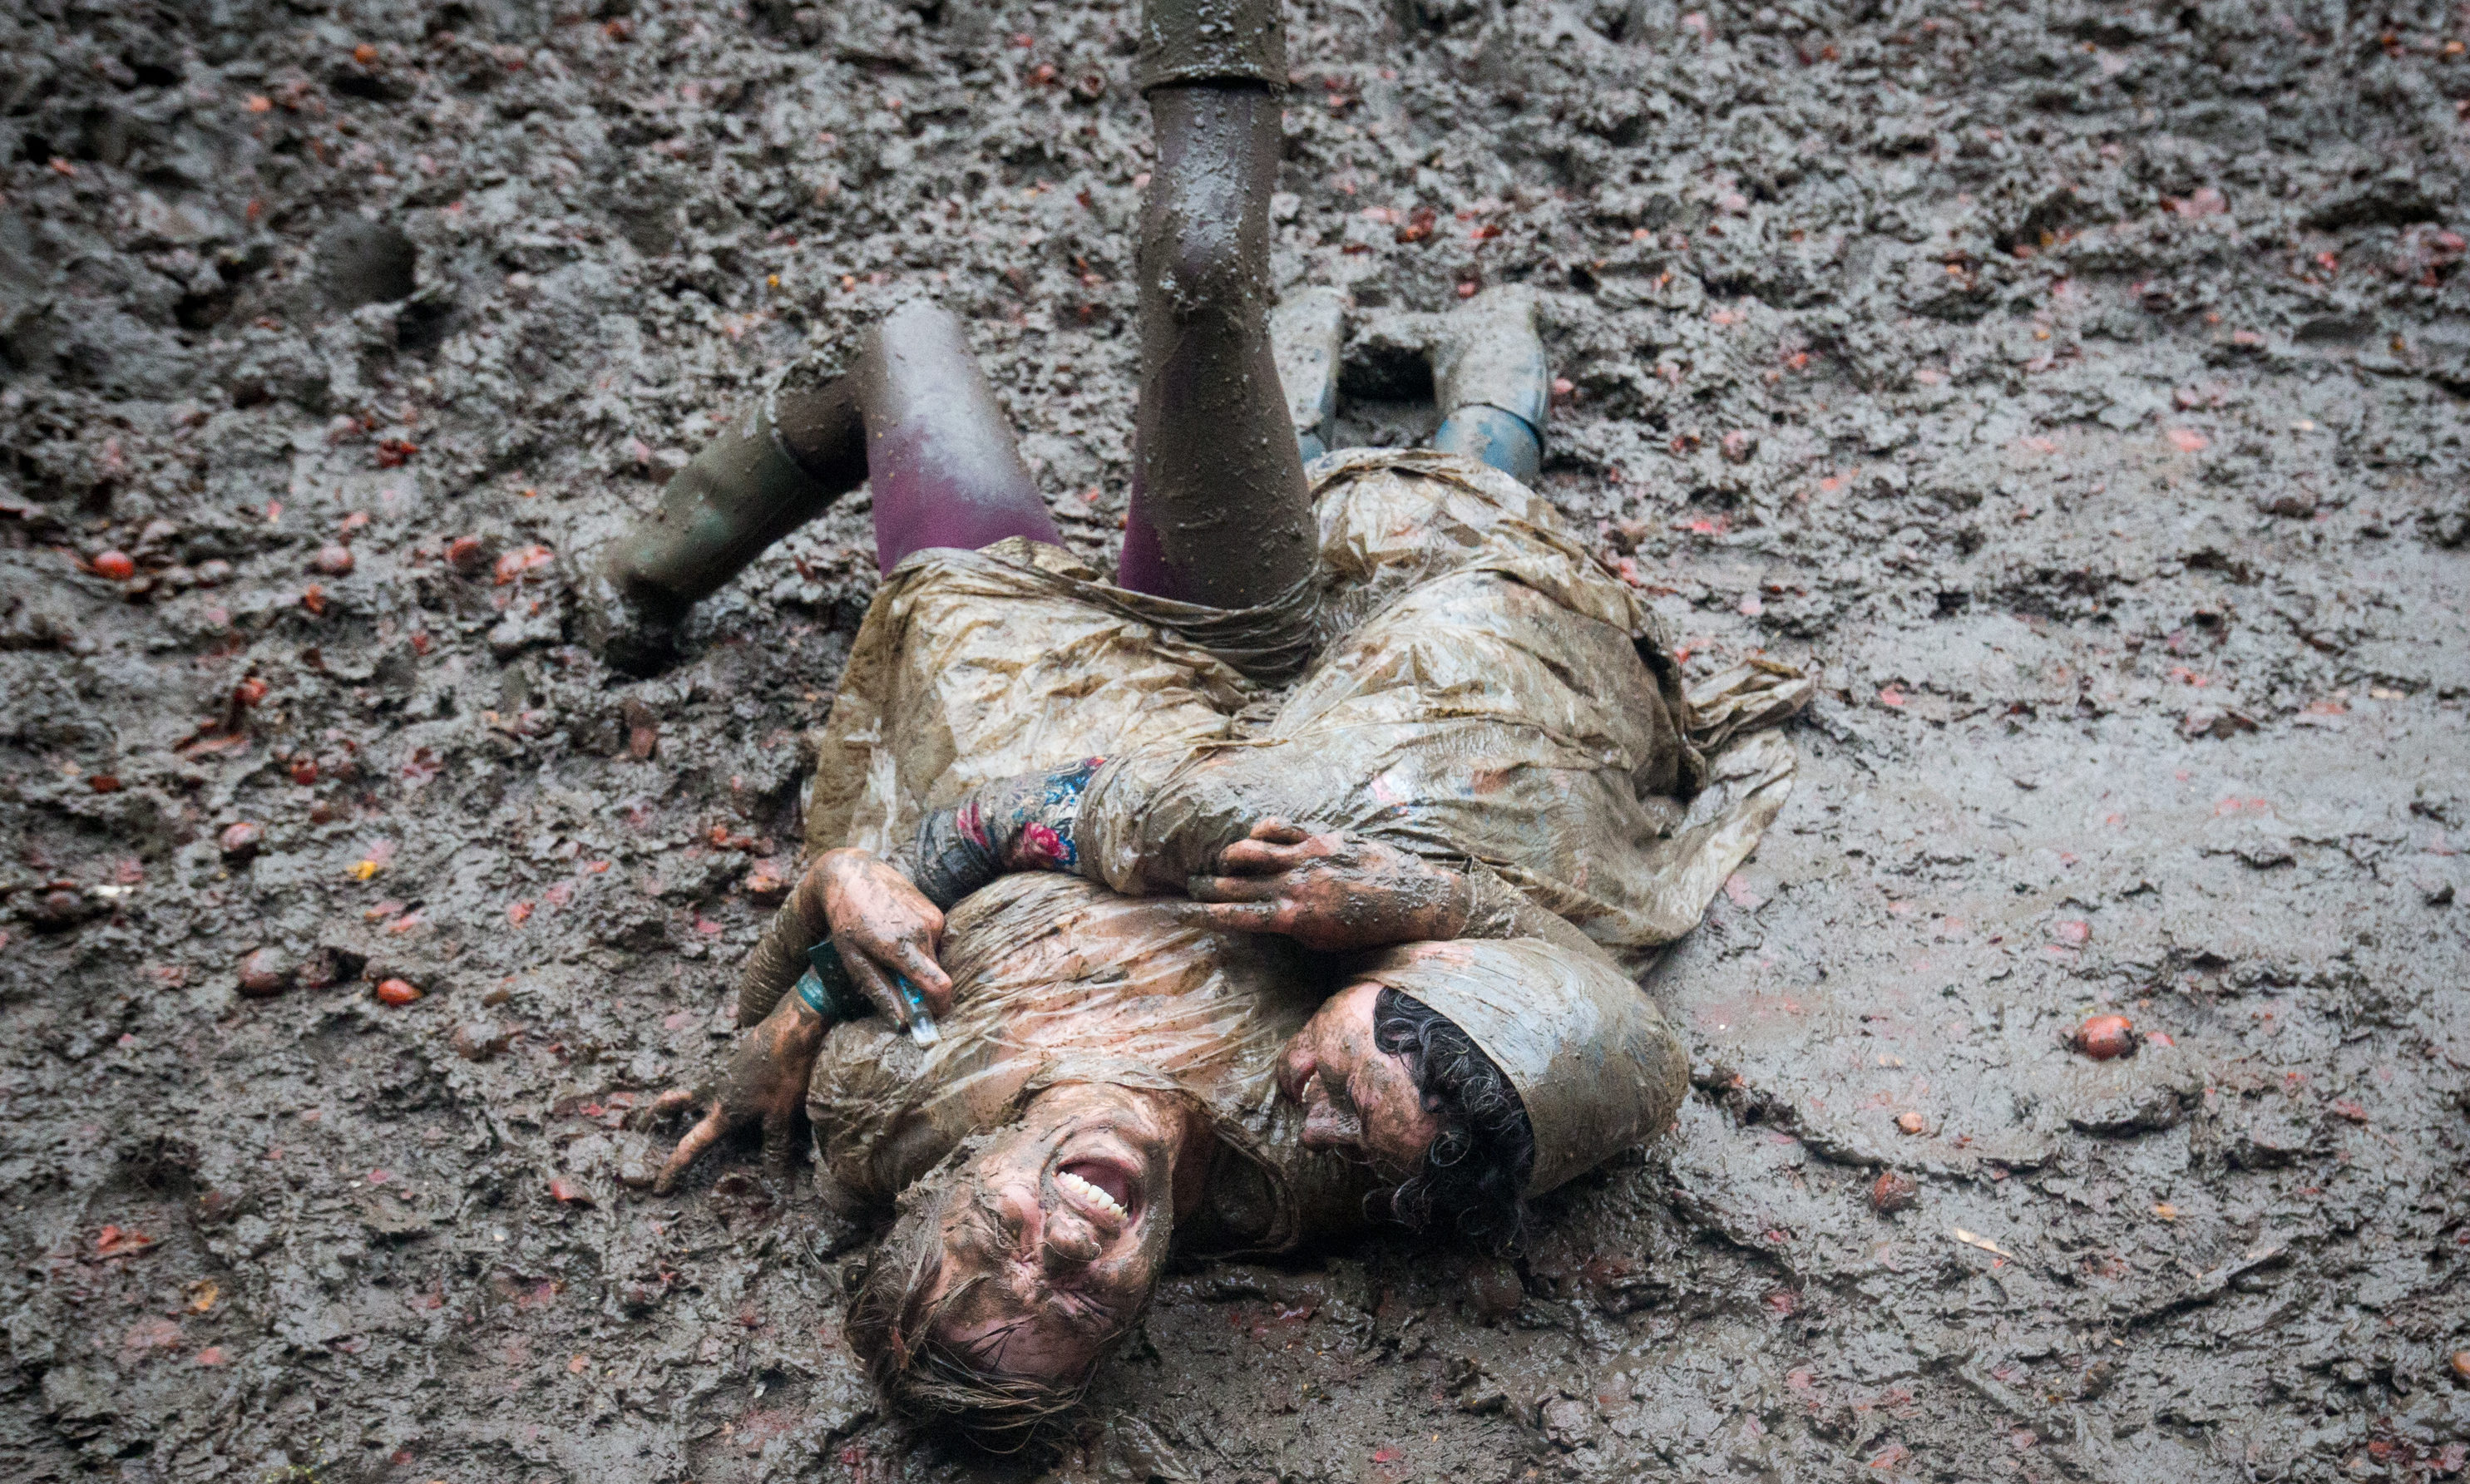 Two festival revellers roll in the mud after they took part in a tomato fight at the Glastonbury Festival 2016. (Photo by Matt Cardy/Getty Images)